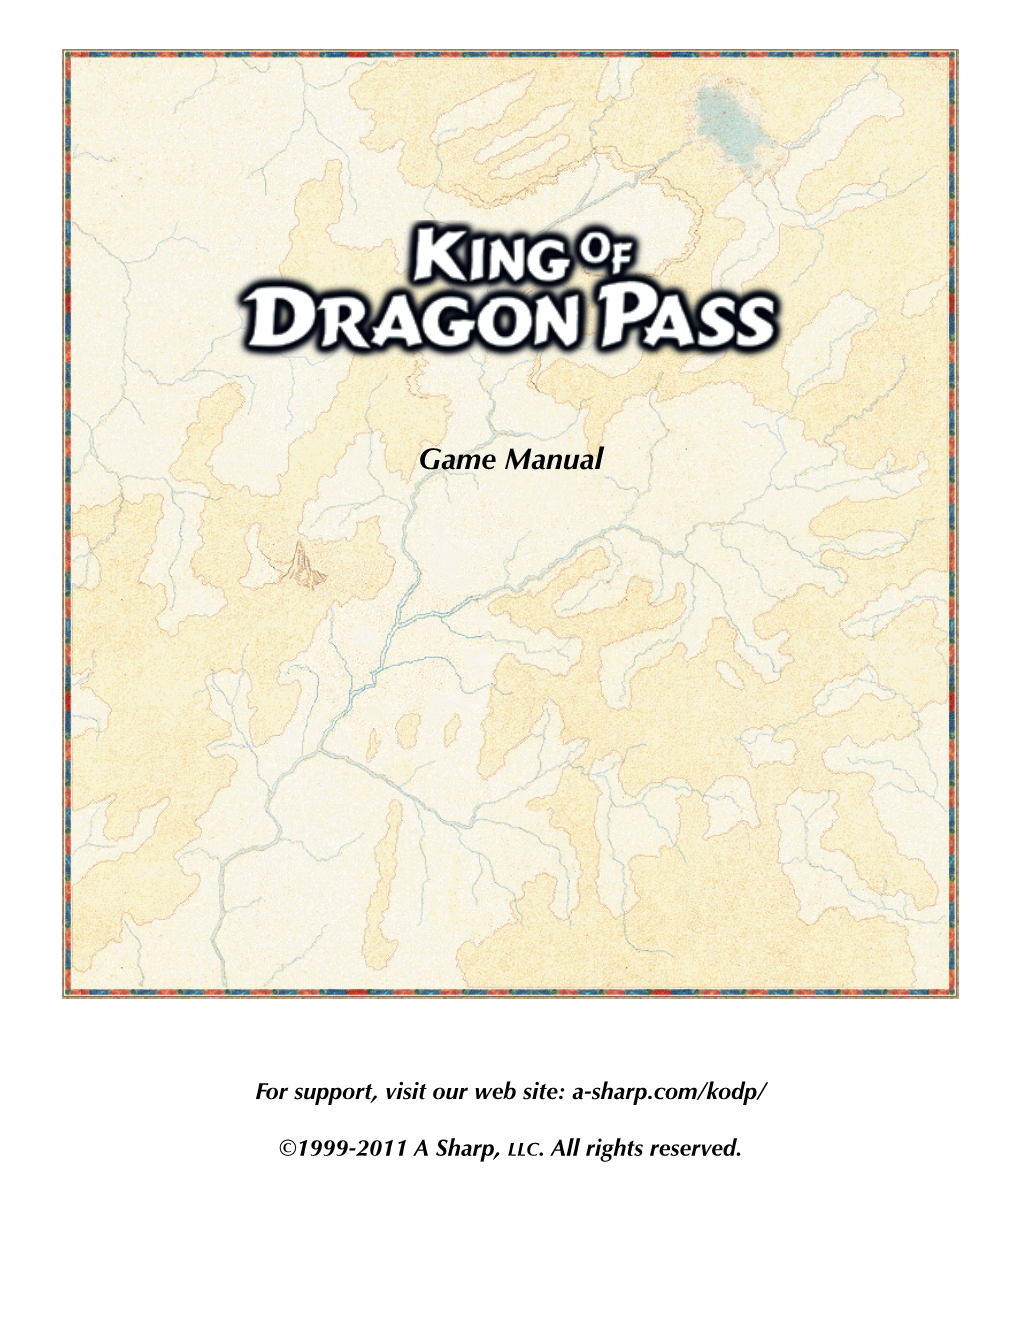 King of Dragon Pass, You Play Generations in the Life of a Barbarian Clan